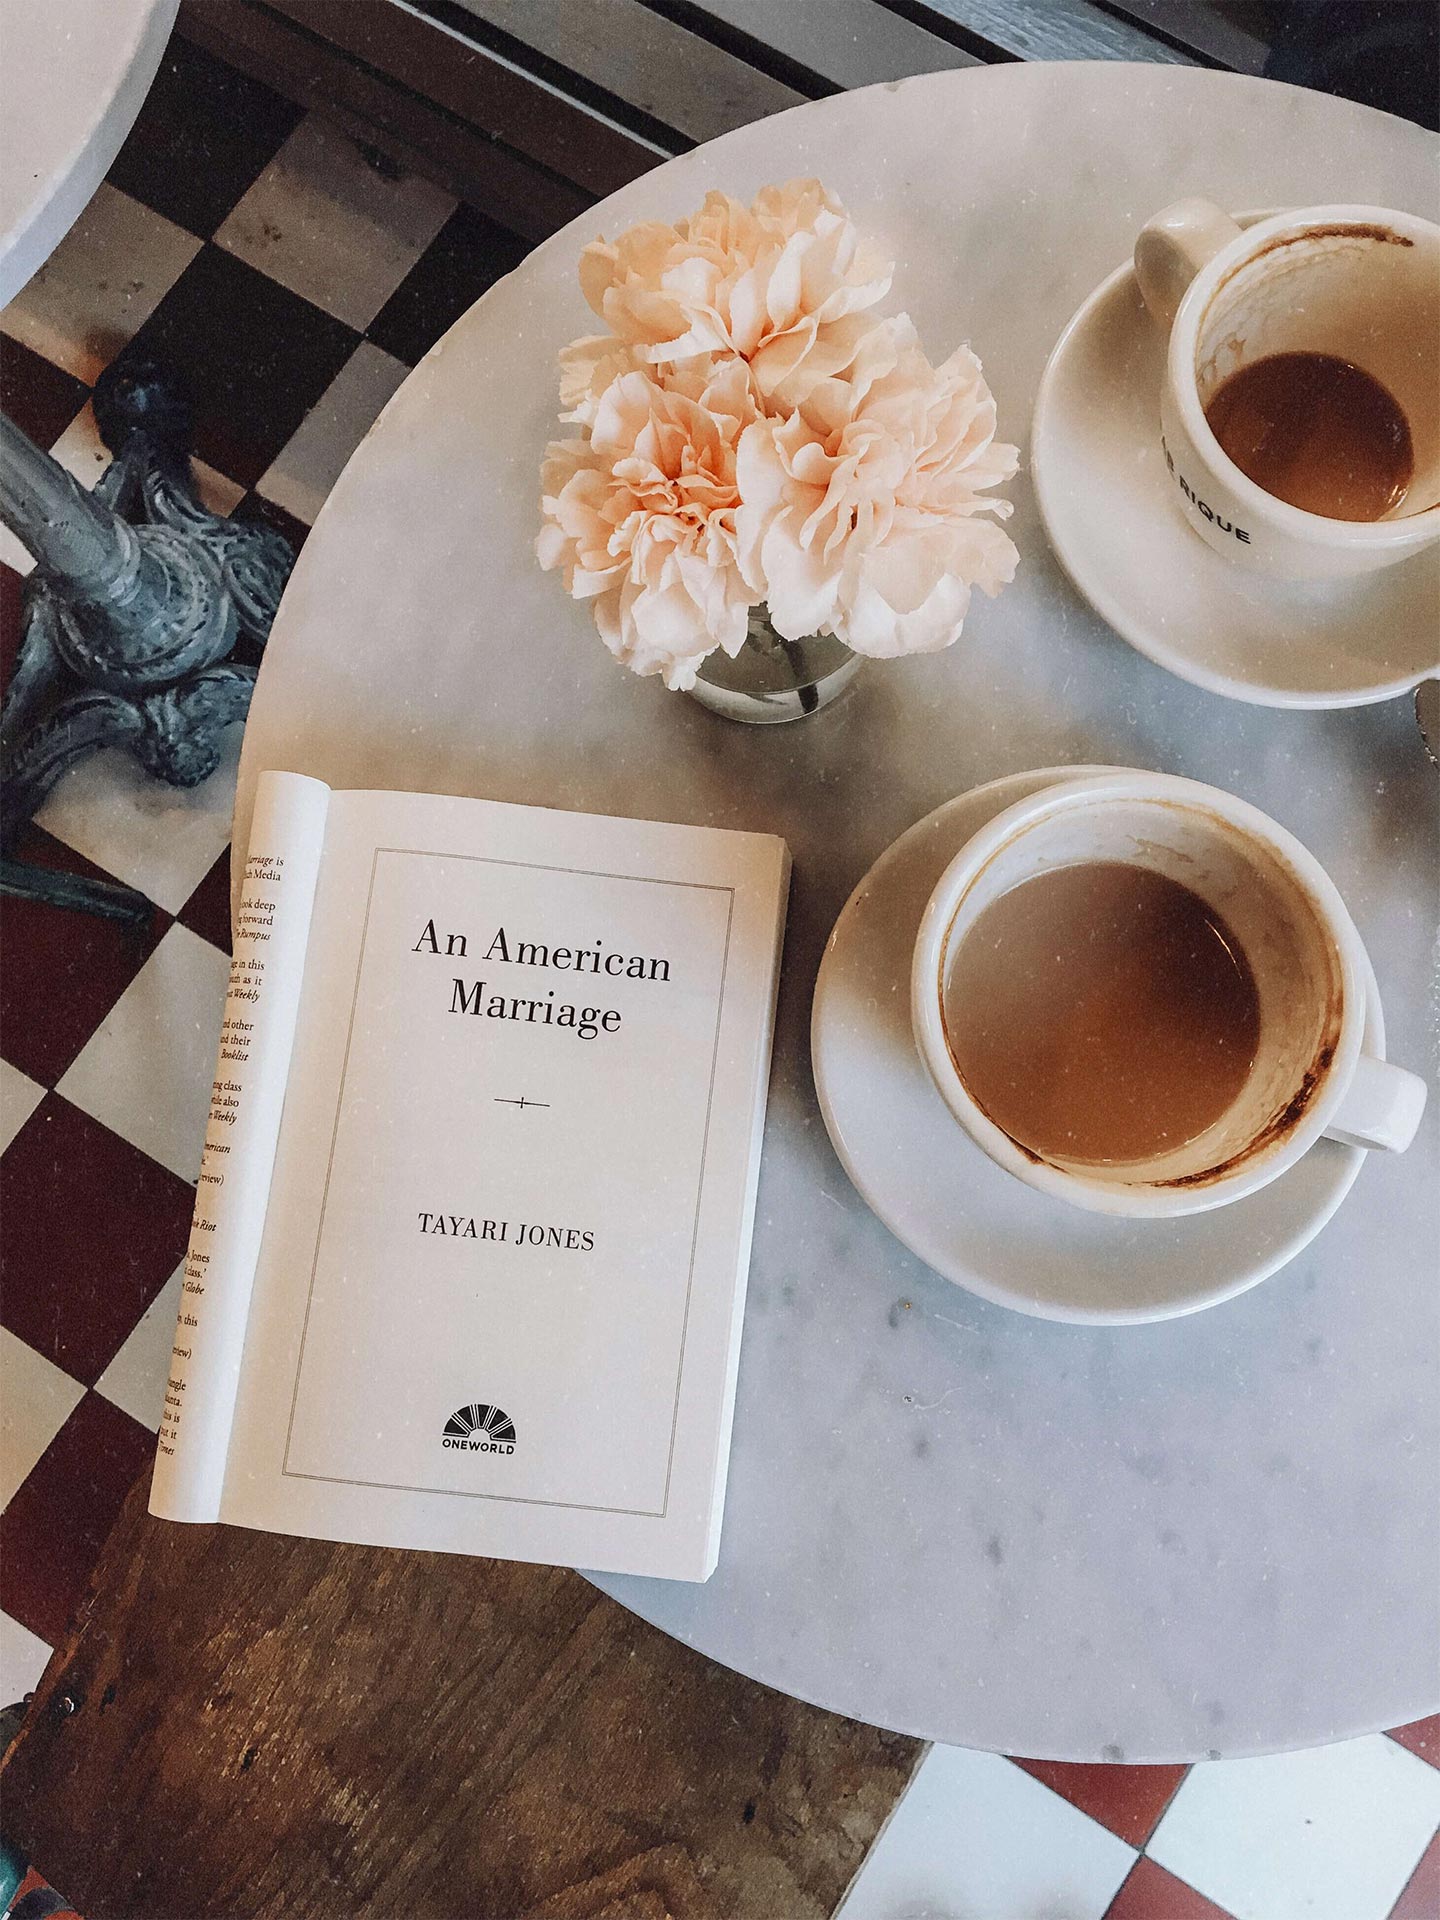 an American marriage read at a coffee table with a bouquet of flowers